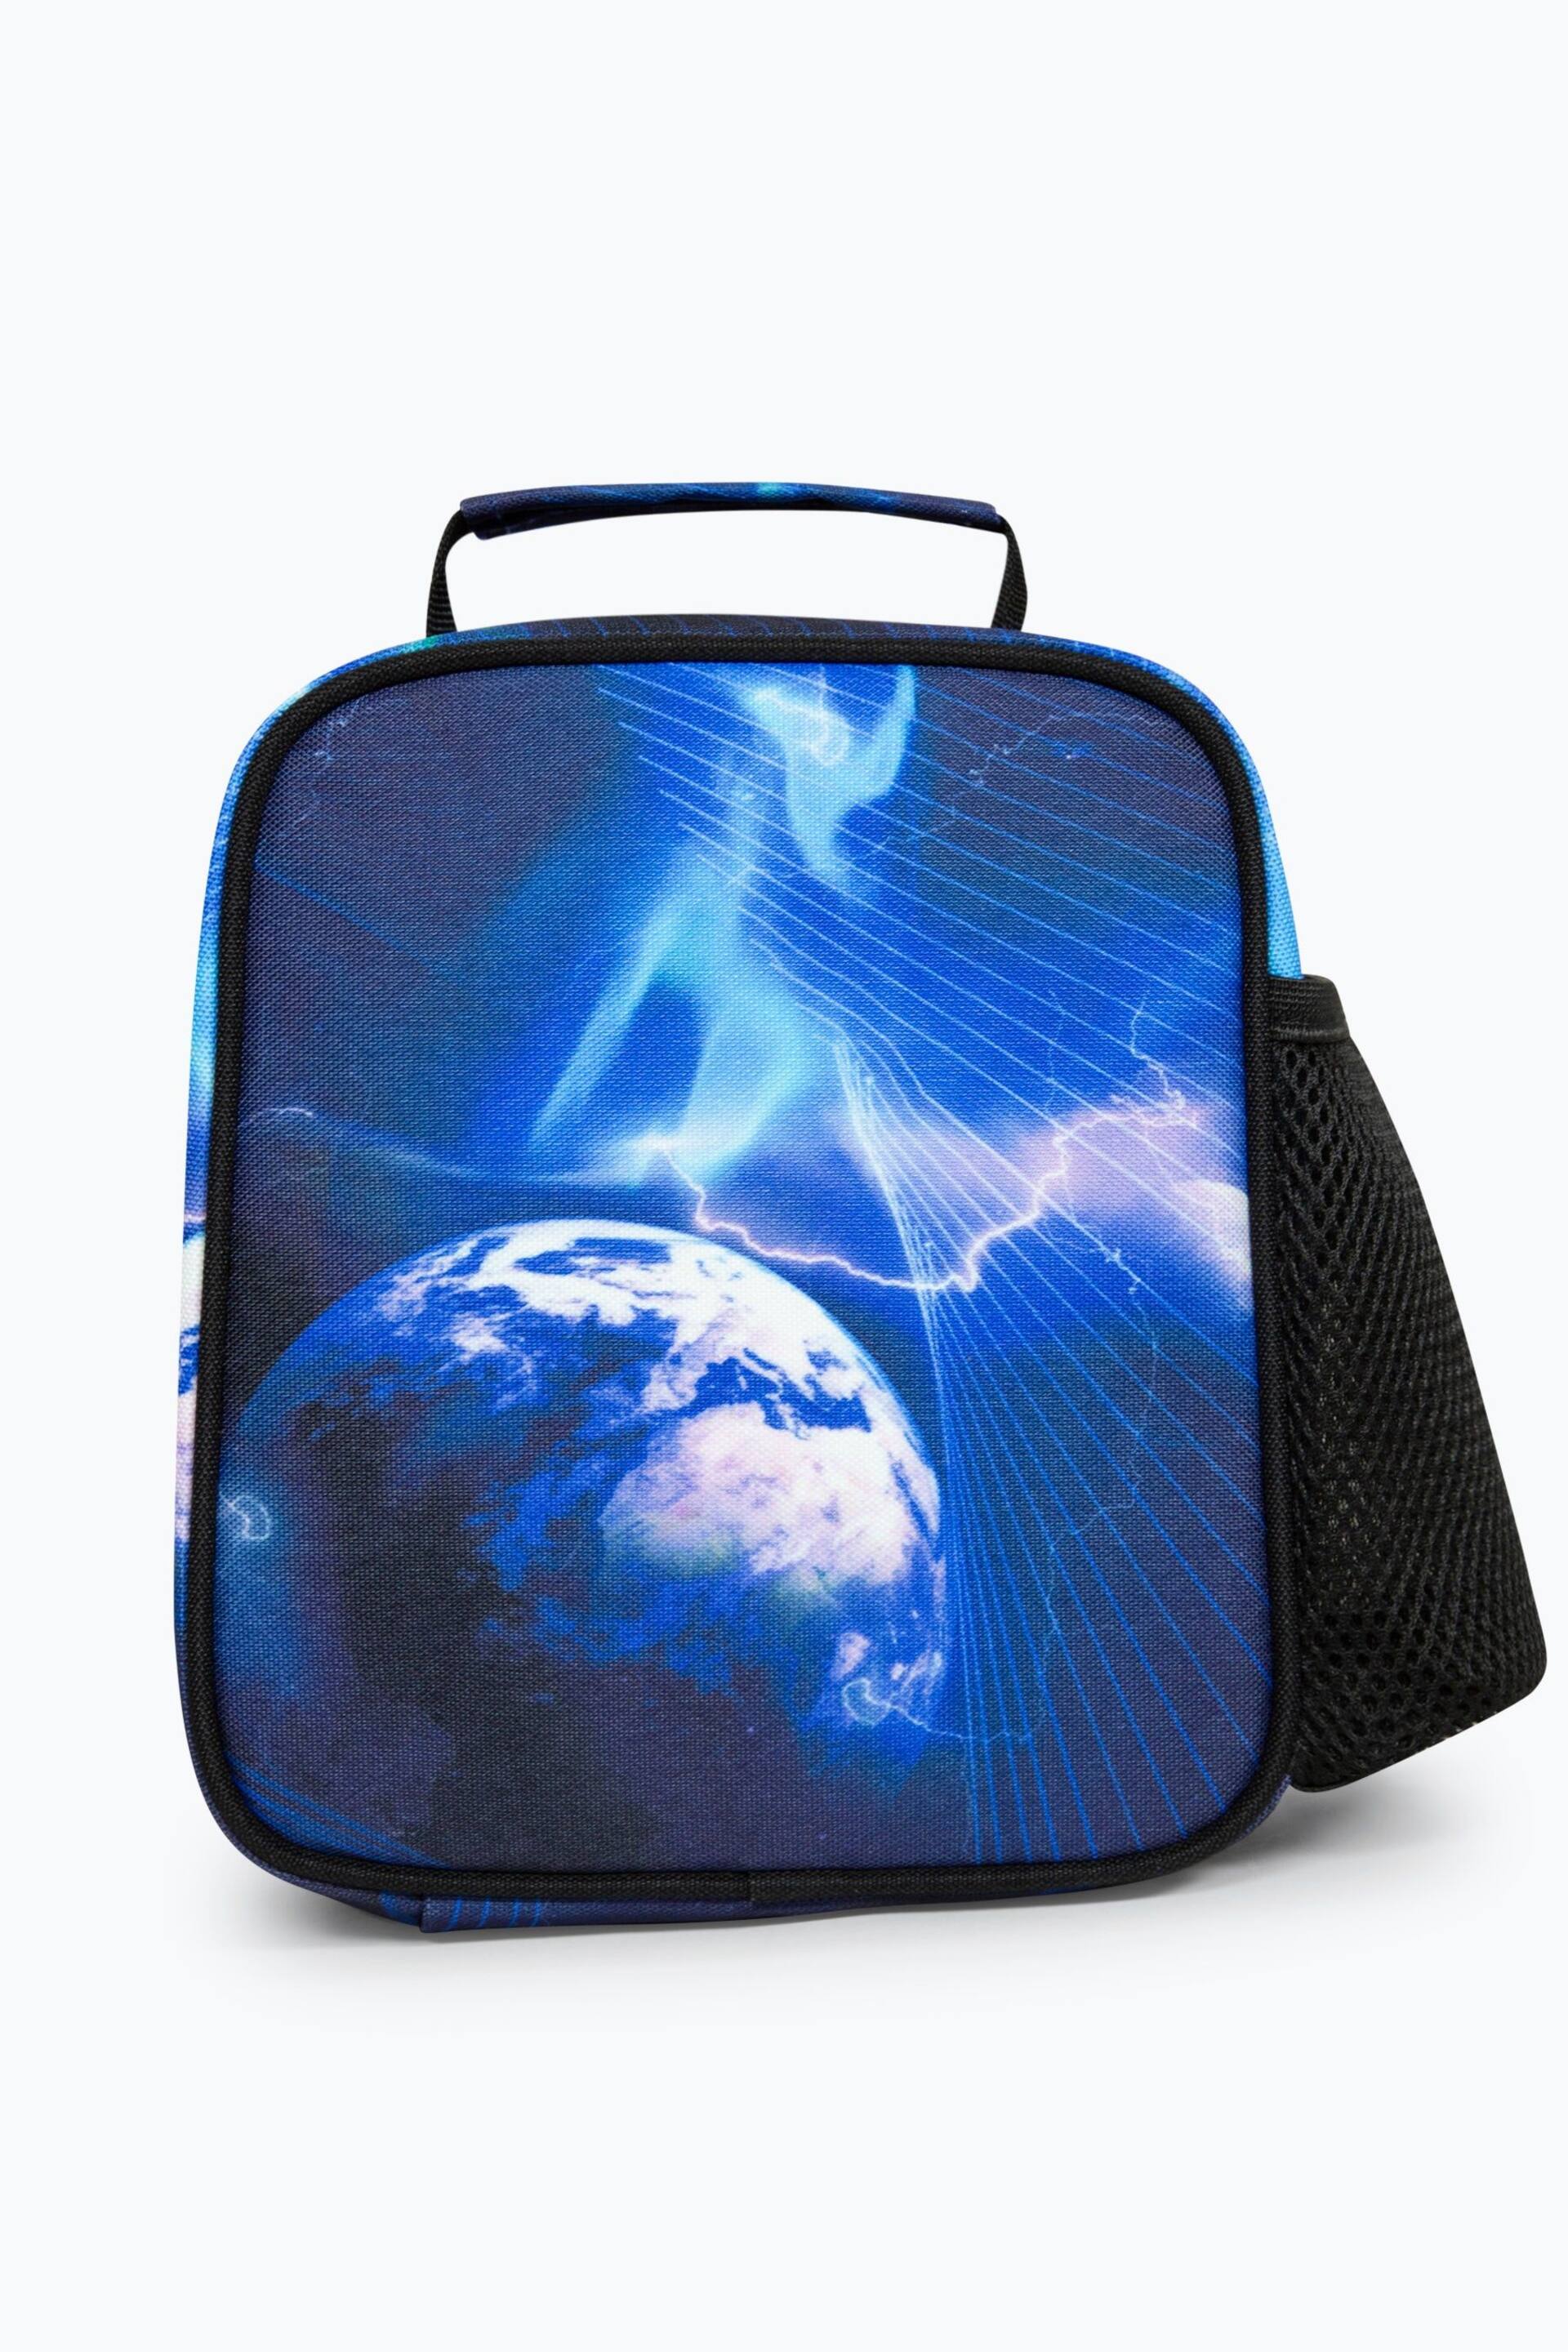 Hype. Unisex Blue Space Storm V2 Lunch Box - Image 2 of 7